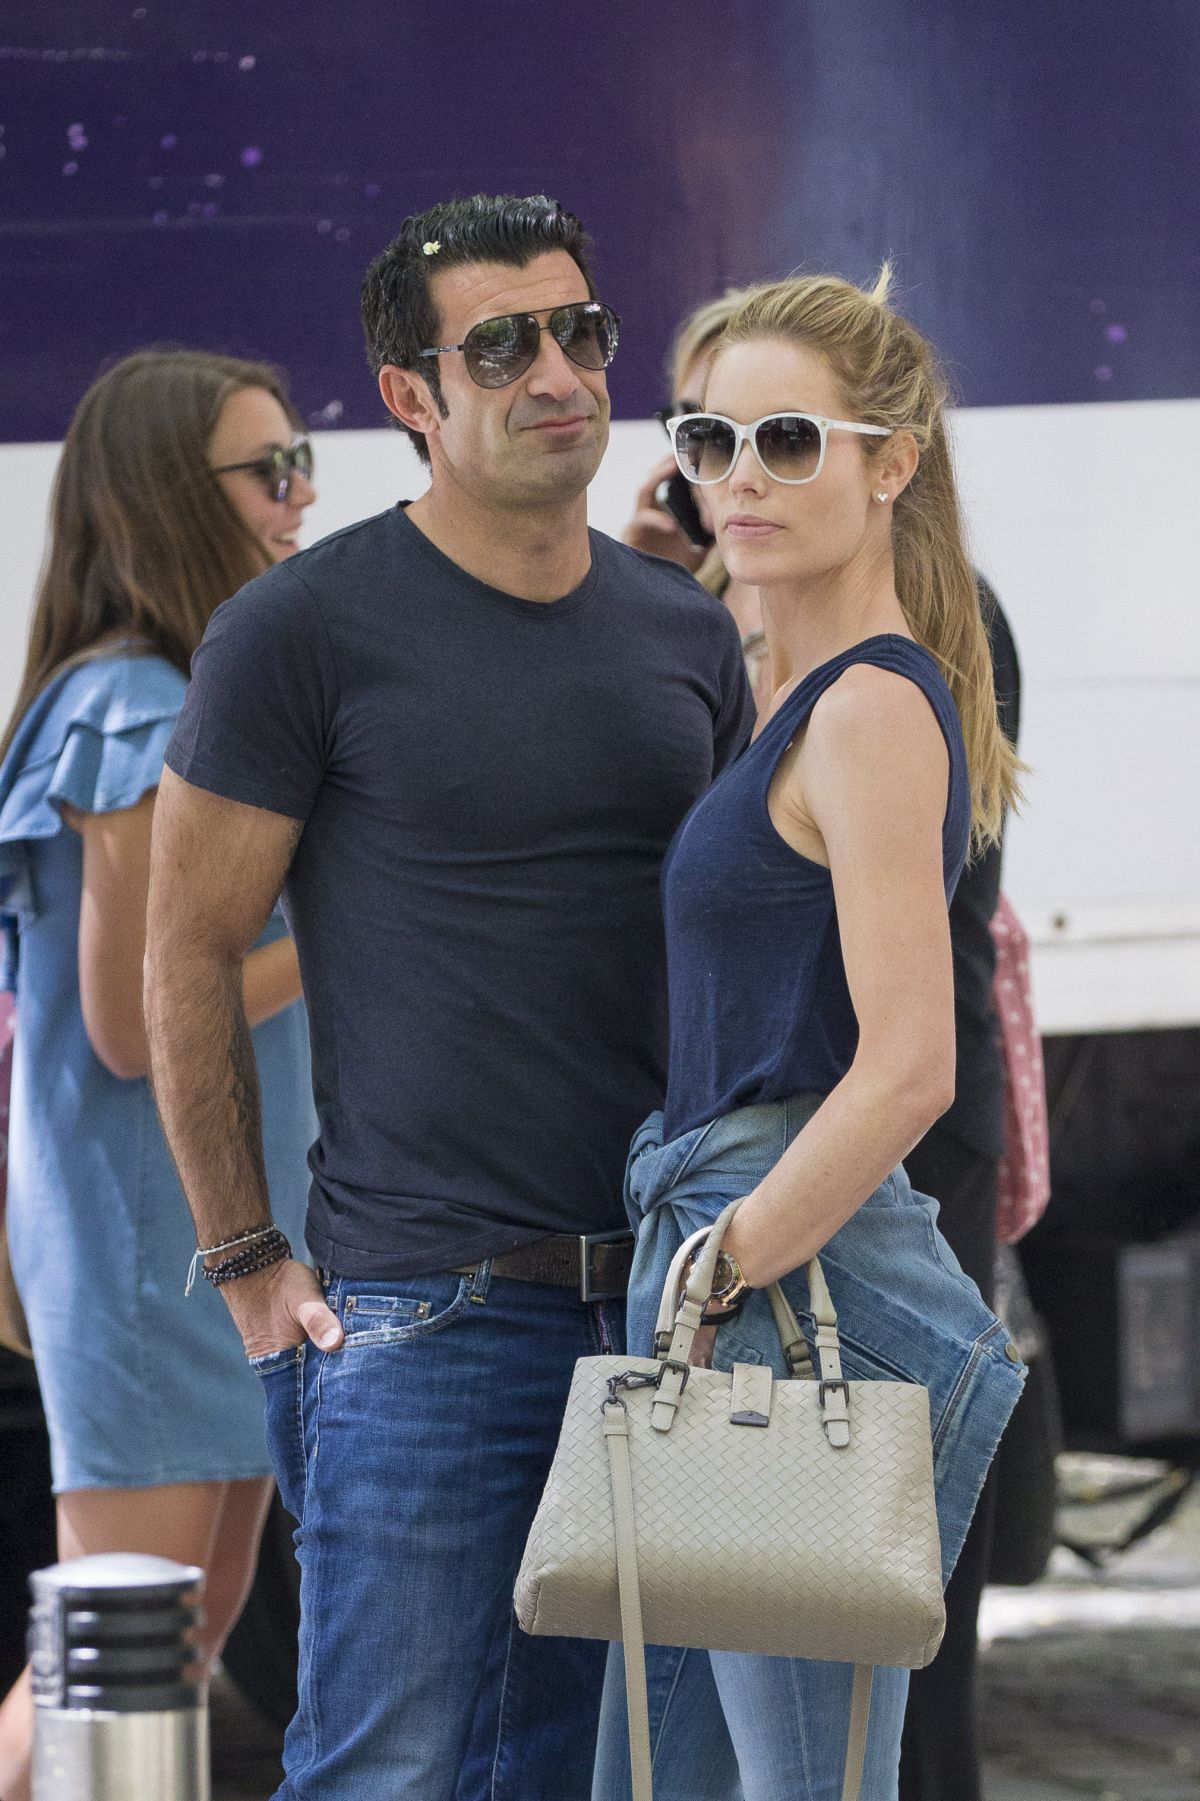 ¿Cuánto mide Luis Figo? - Altura - Real height Helen-svedin-and-luis-figo-out-for-lunch-in-madrid-06-26-2017_1